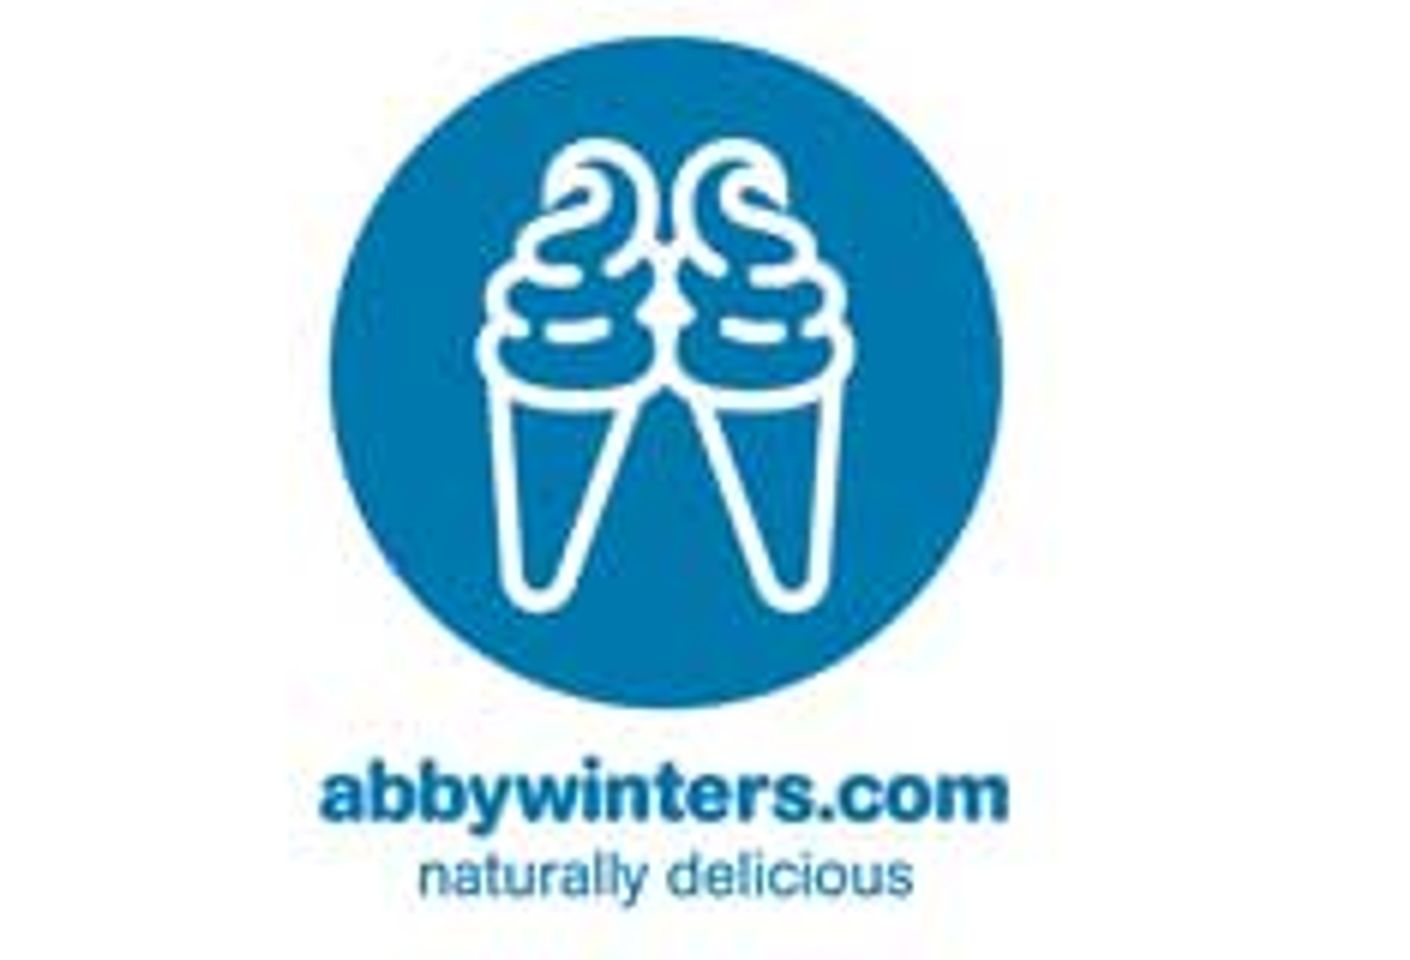 Abbywinters.com Releases Four New DVDs for November